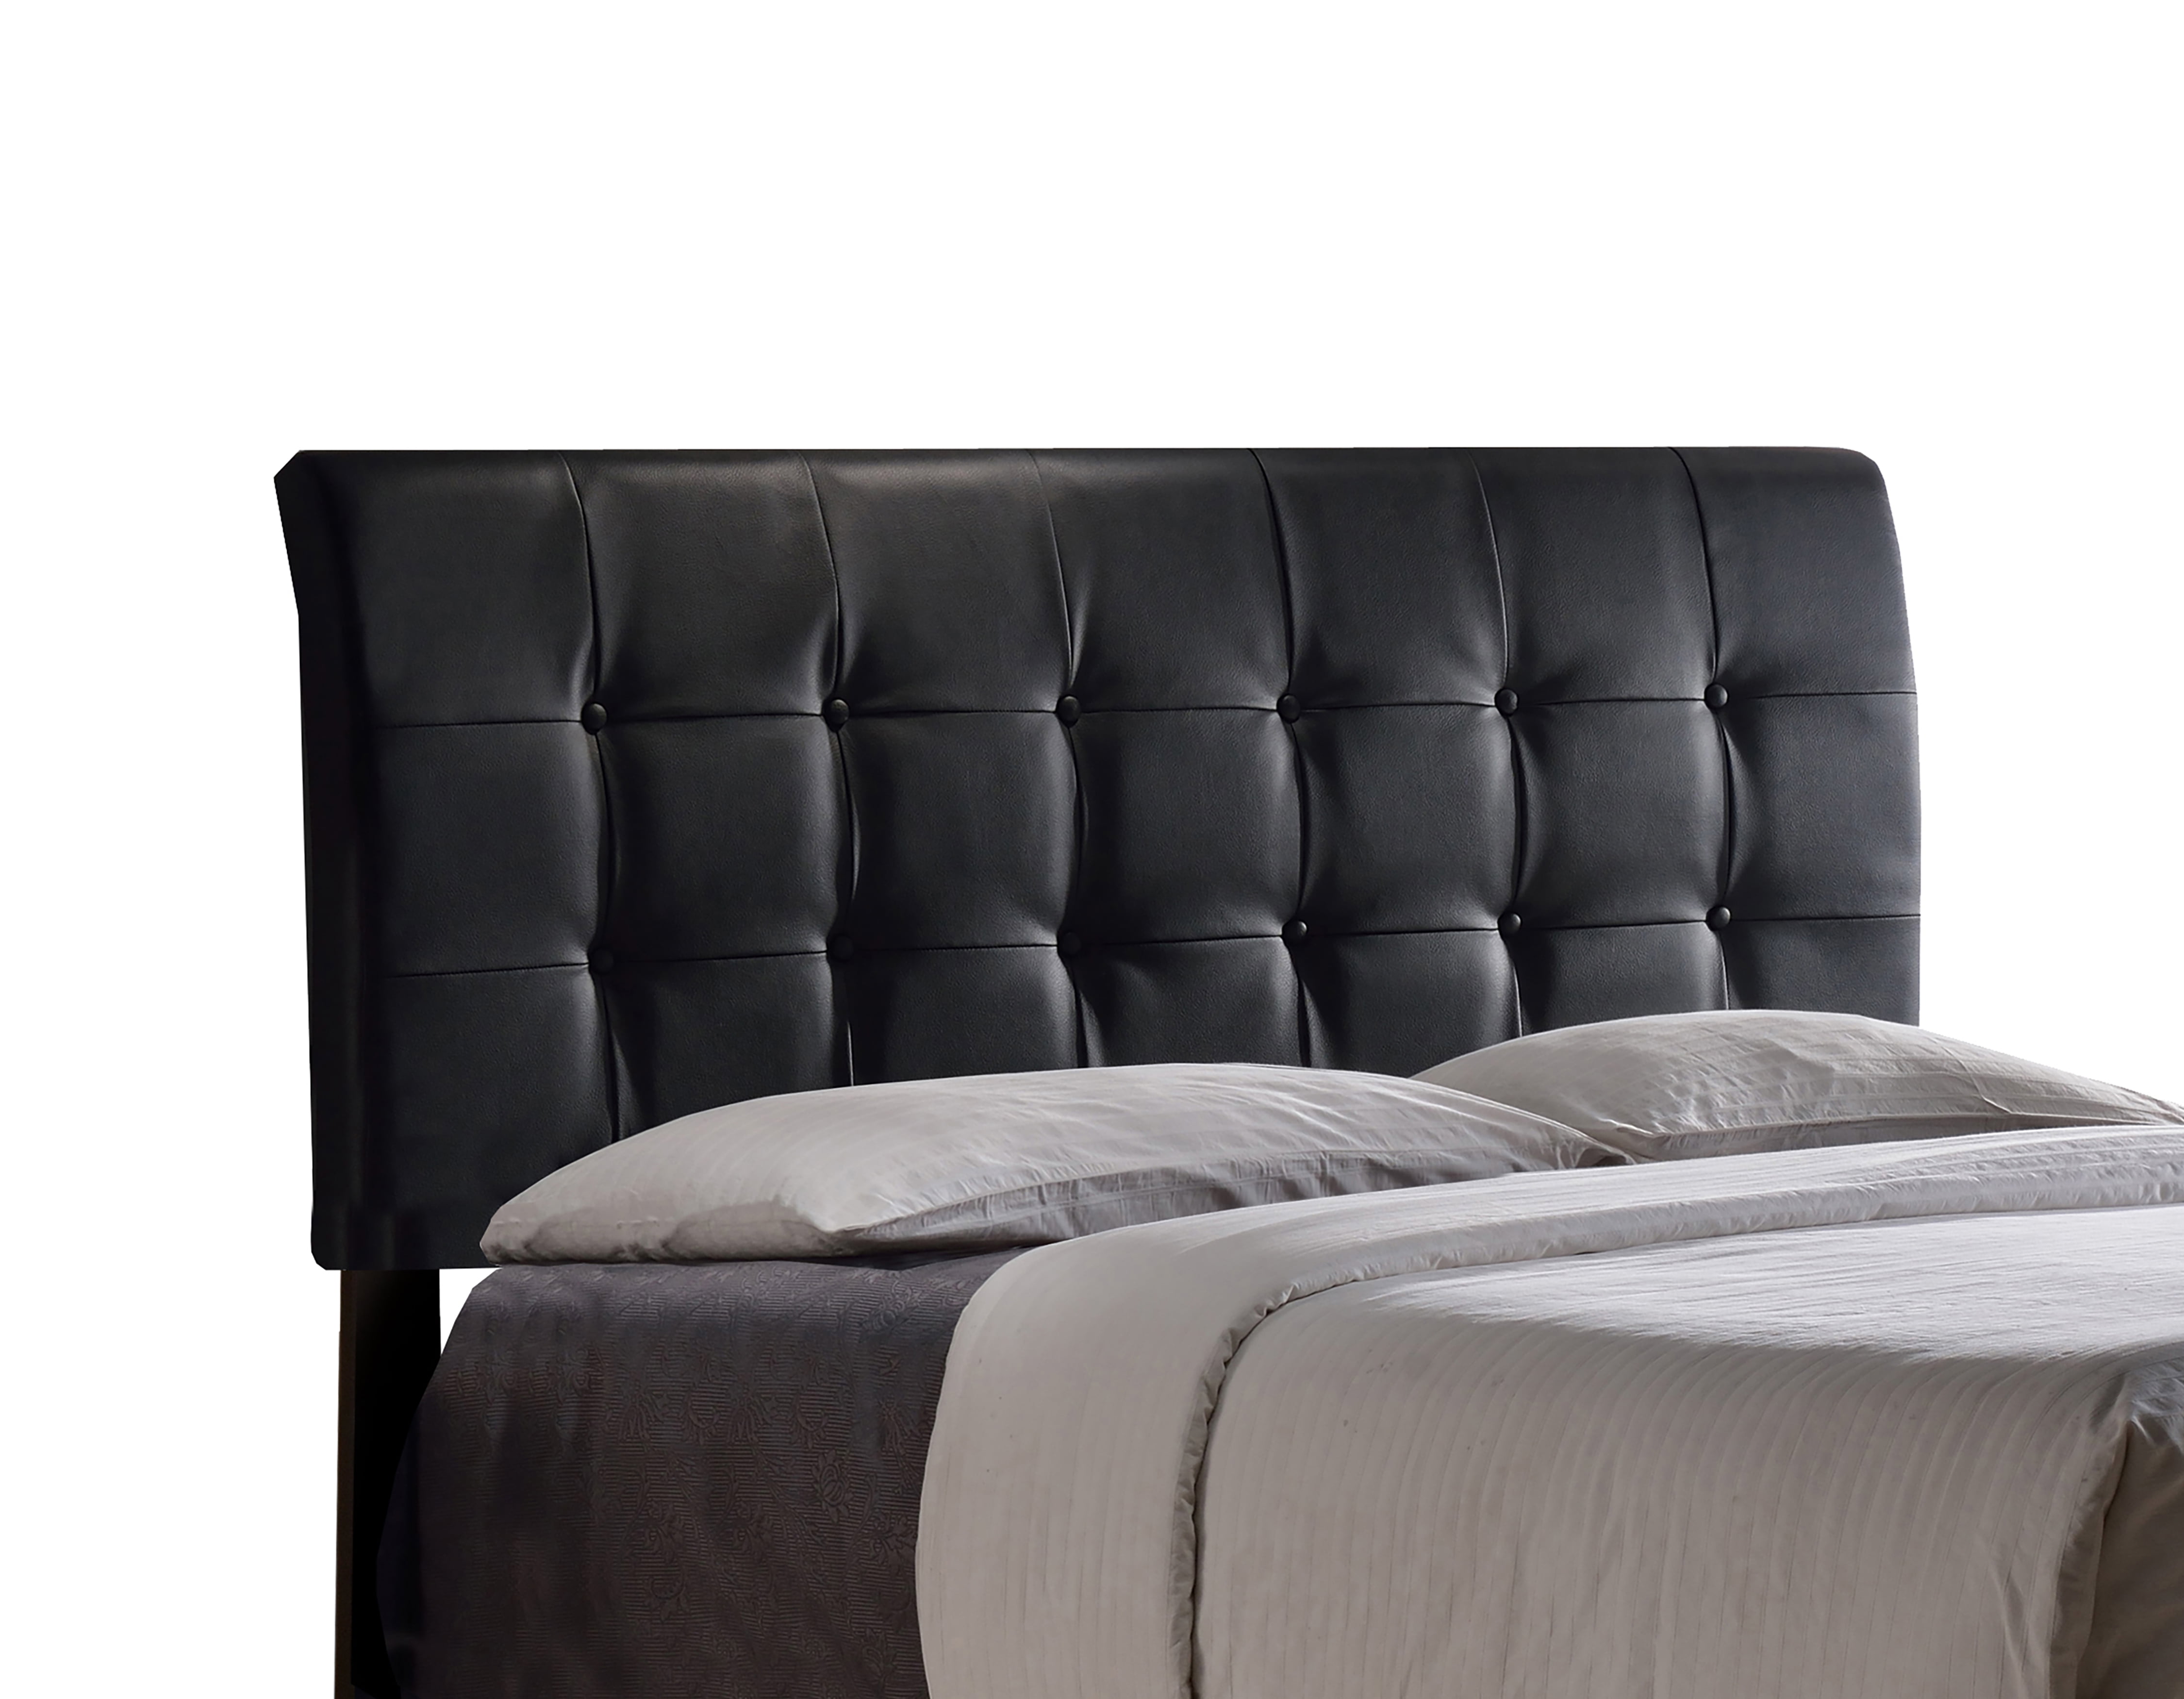 Hilale Furniture Lusso Faux Leather, Leather Studded Headboard